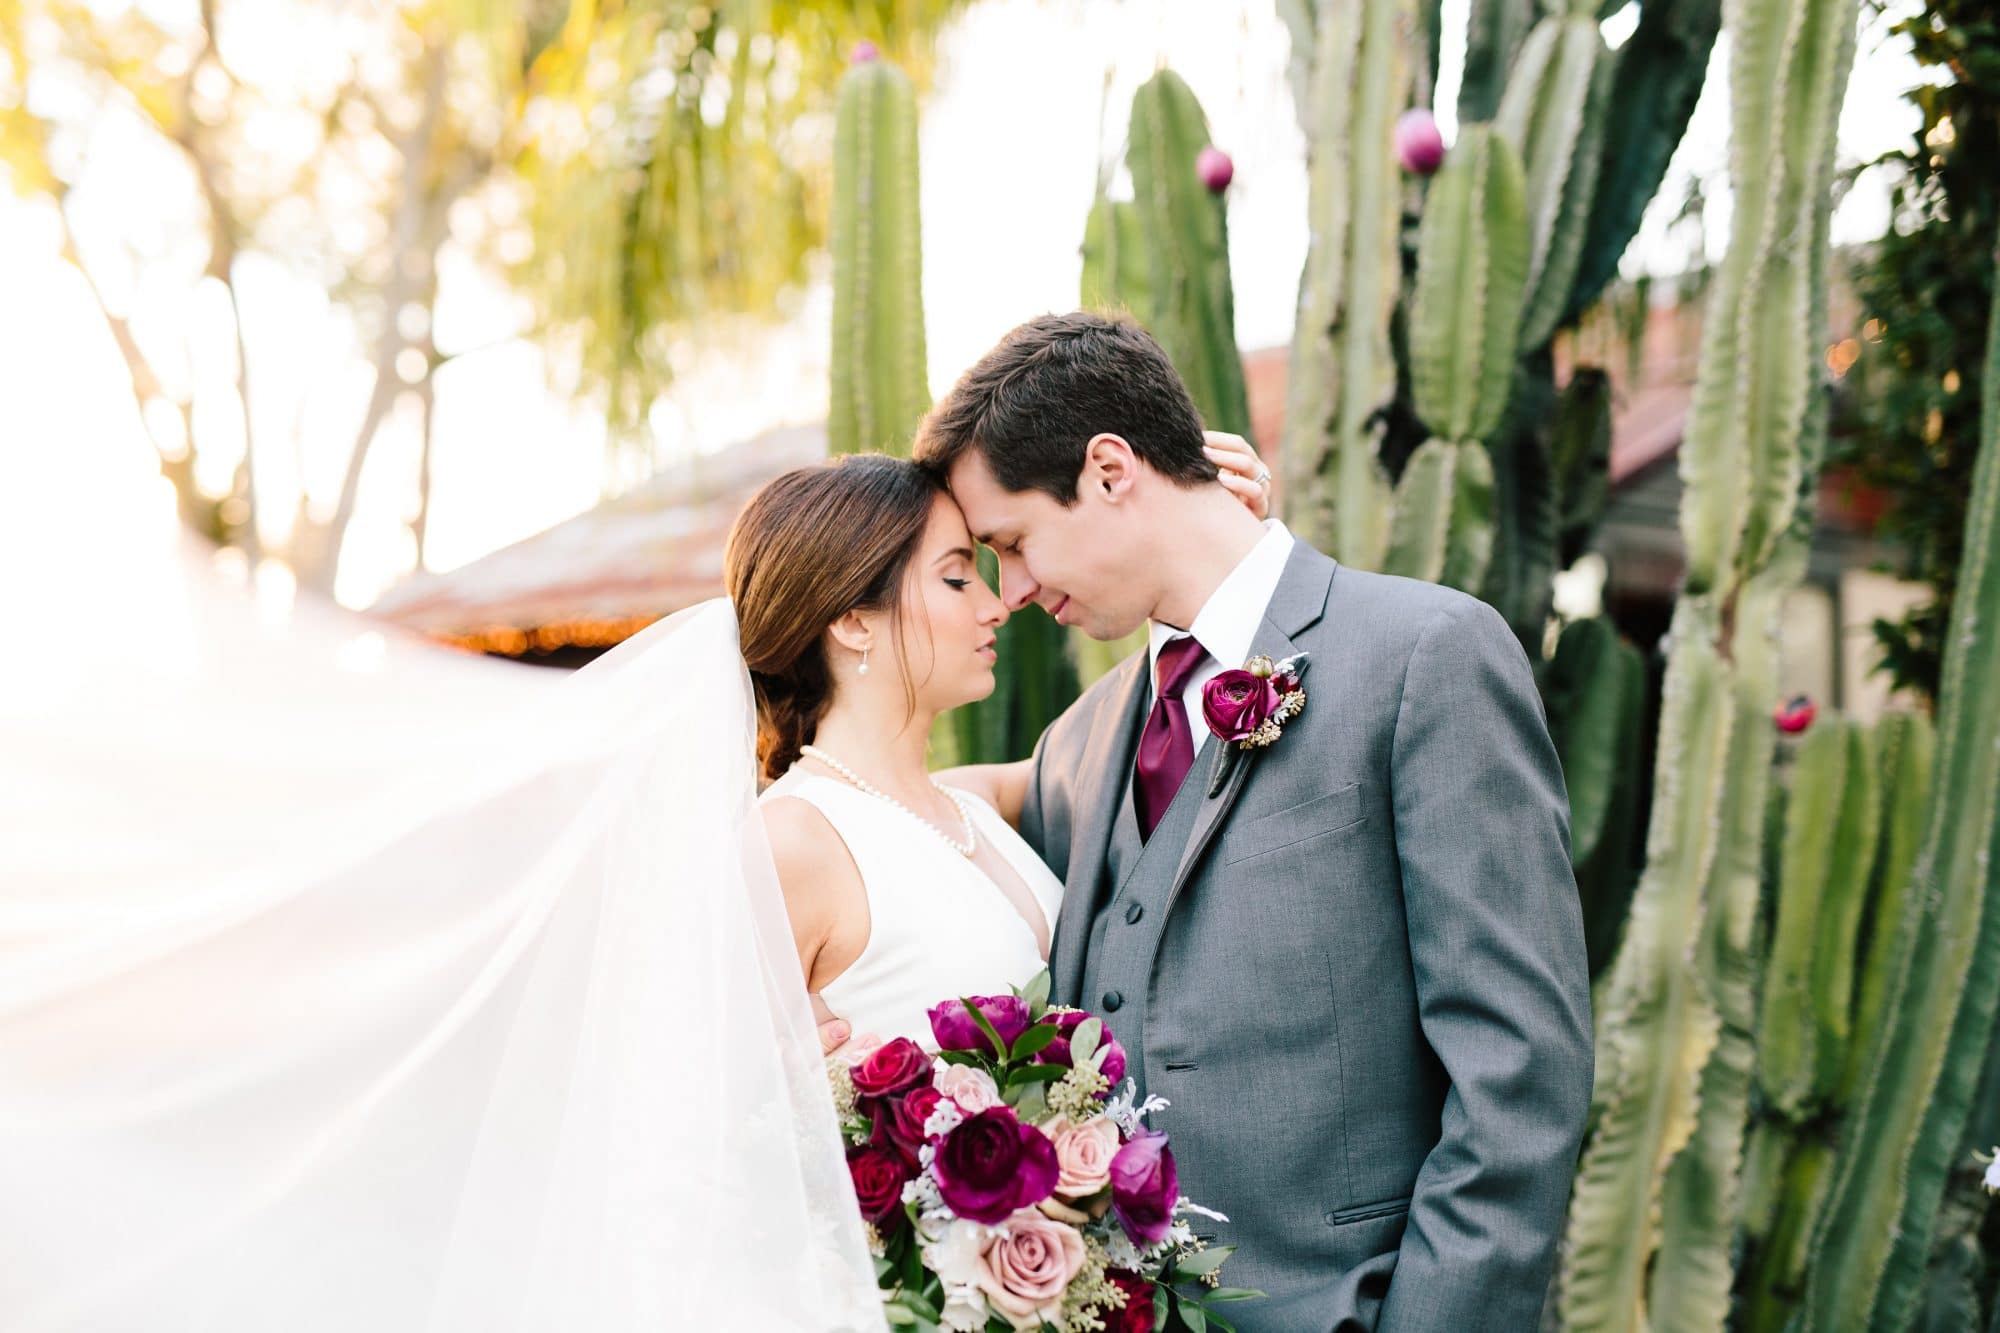 Plan It Events - bride and groom sharing intimate moment with cactus background